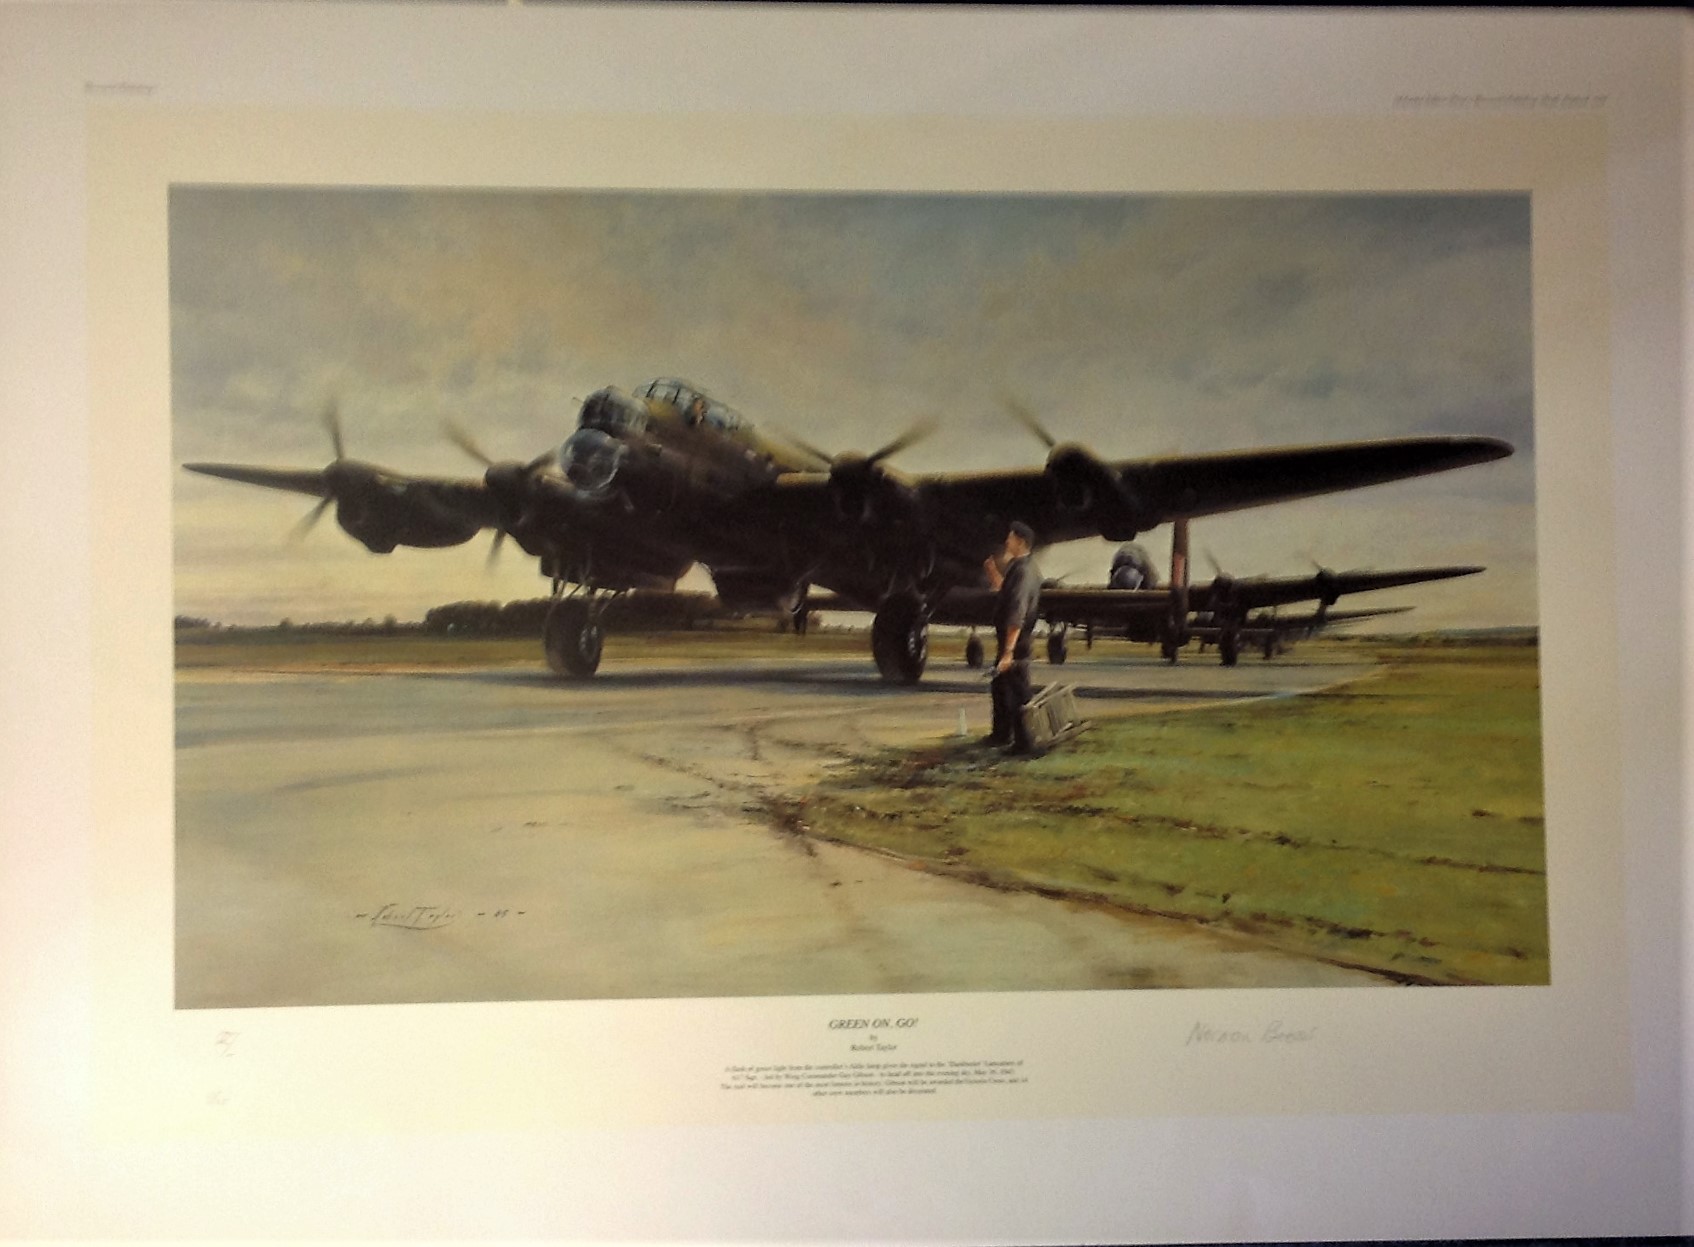 Dambusters World War Two print 20x27 titled GREEN ON GO by the artist Robert Taylor signed in pencil